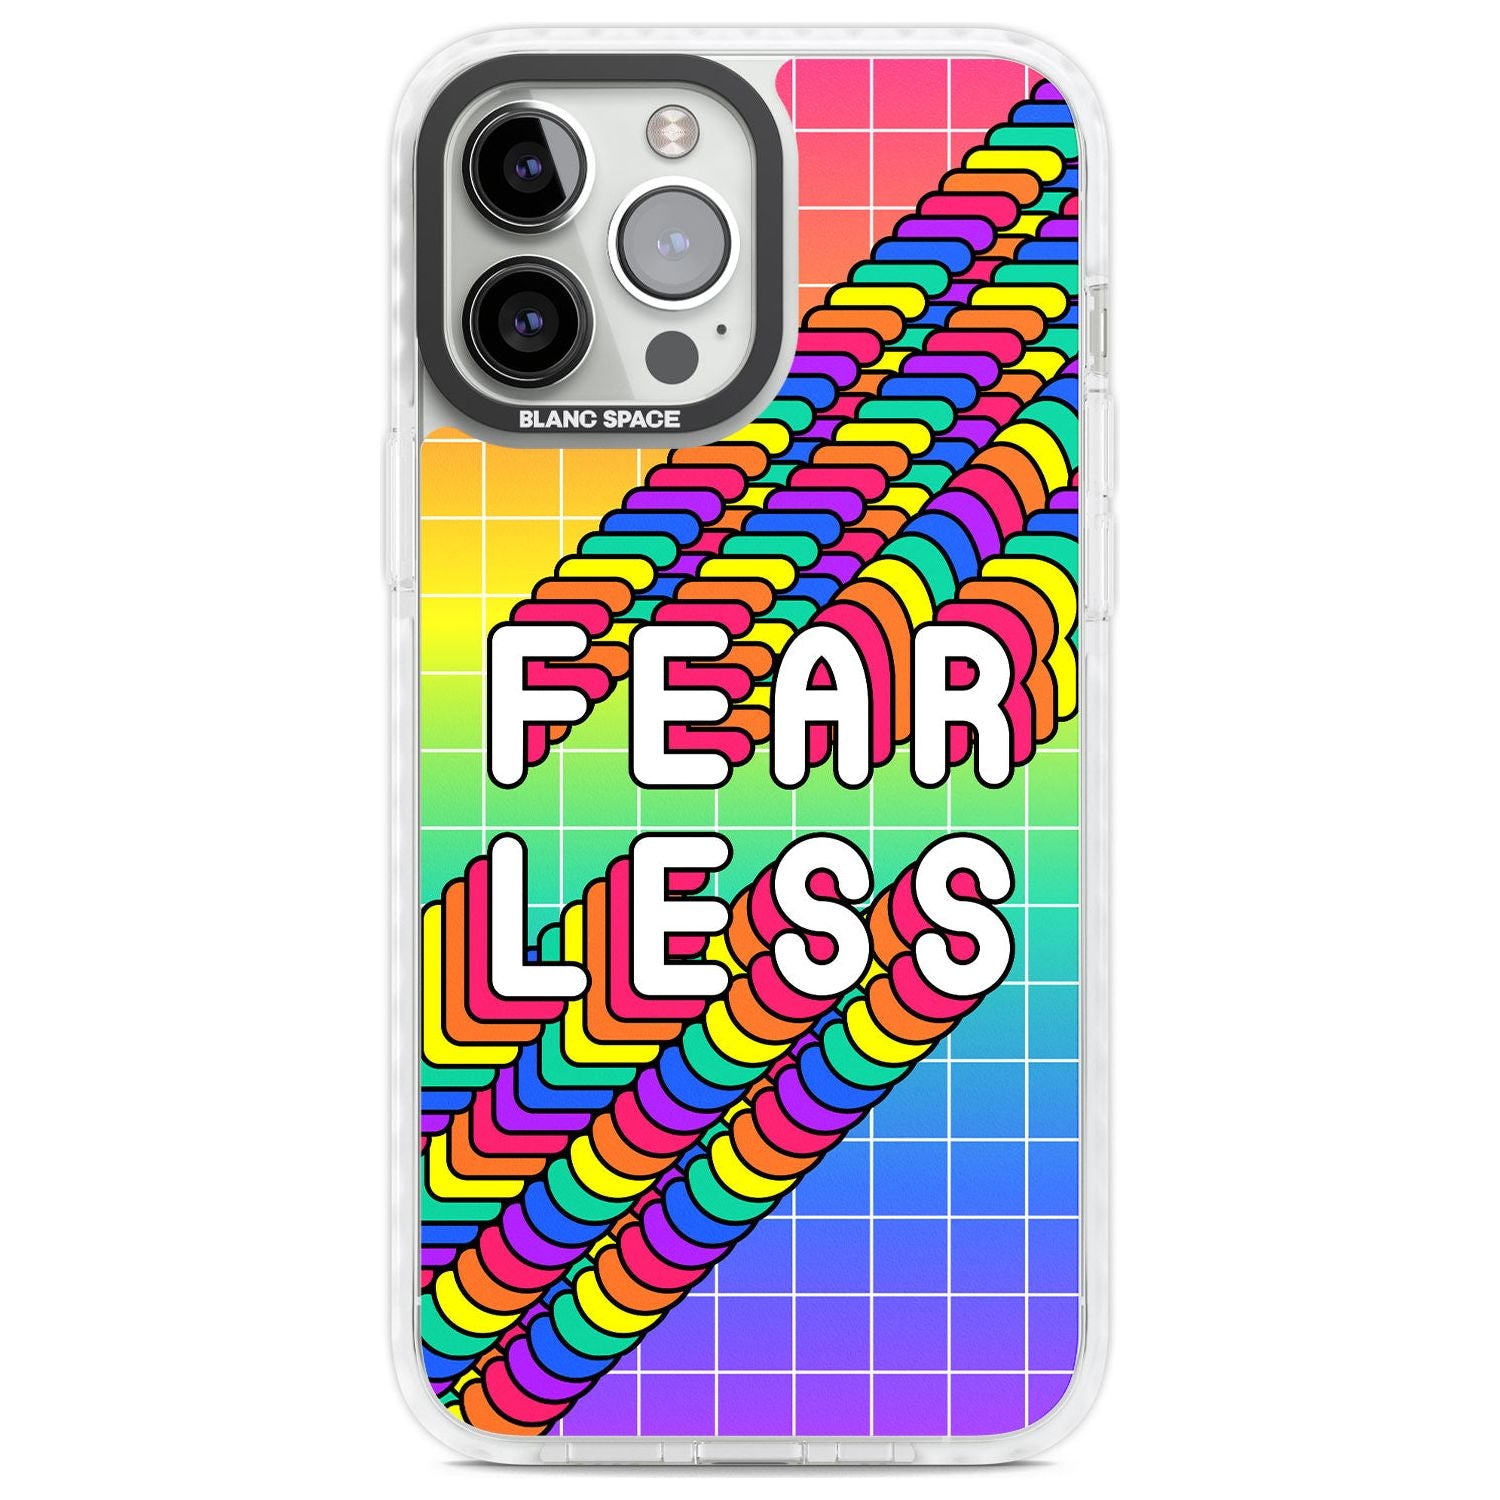 Fearless Phone Case iPhone 13 Pro Max / Impact Case,iPhone 14 Pro Max / Impact Case Blanc Space